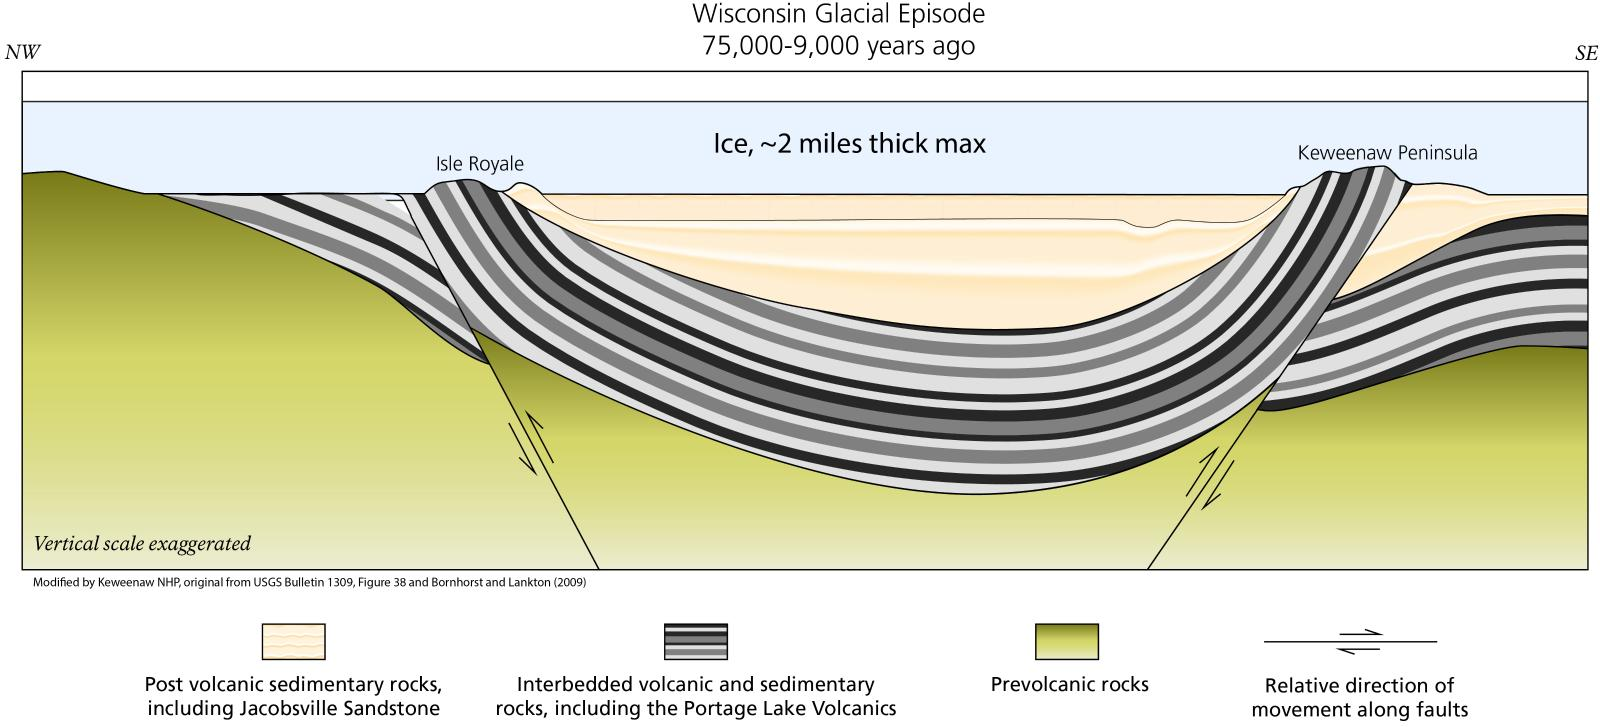 Cross sectional illustration showing rock types. Volcanic and sedimentary rocks form a bowl shape, with Isle Royale and the Keweenaw being opposite rims. A light blue band on the top signifies ice ~2 miles thick during the last glacial episode.